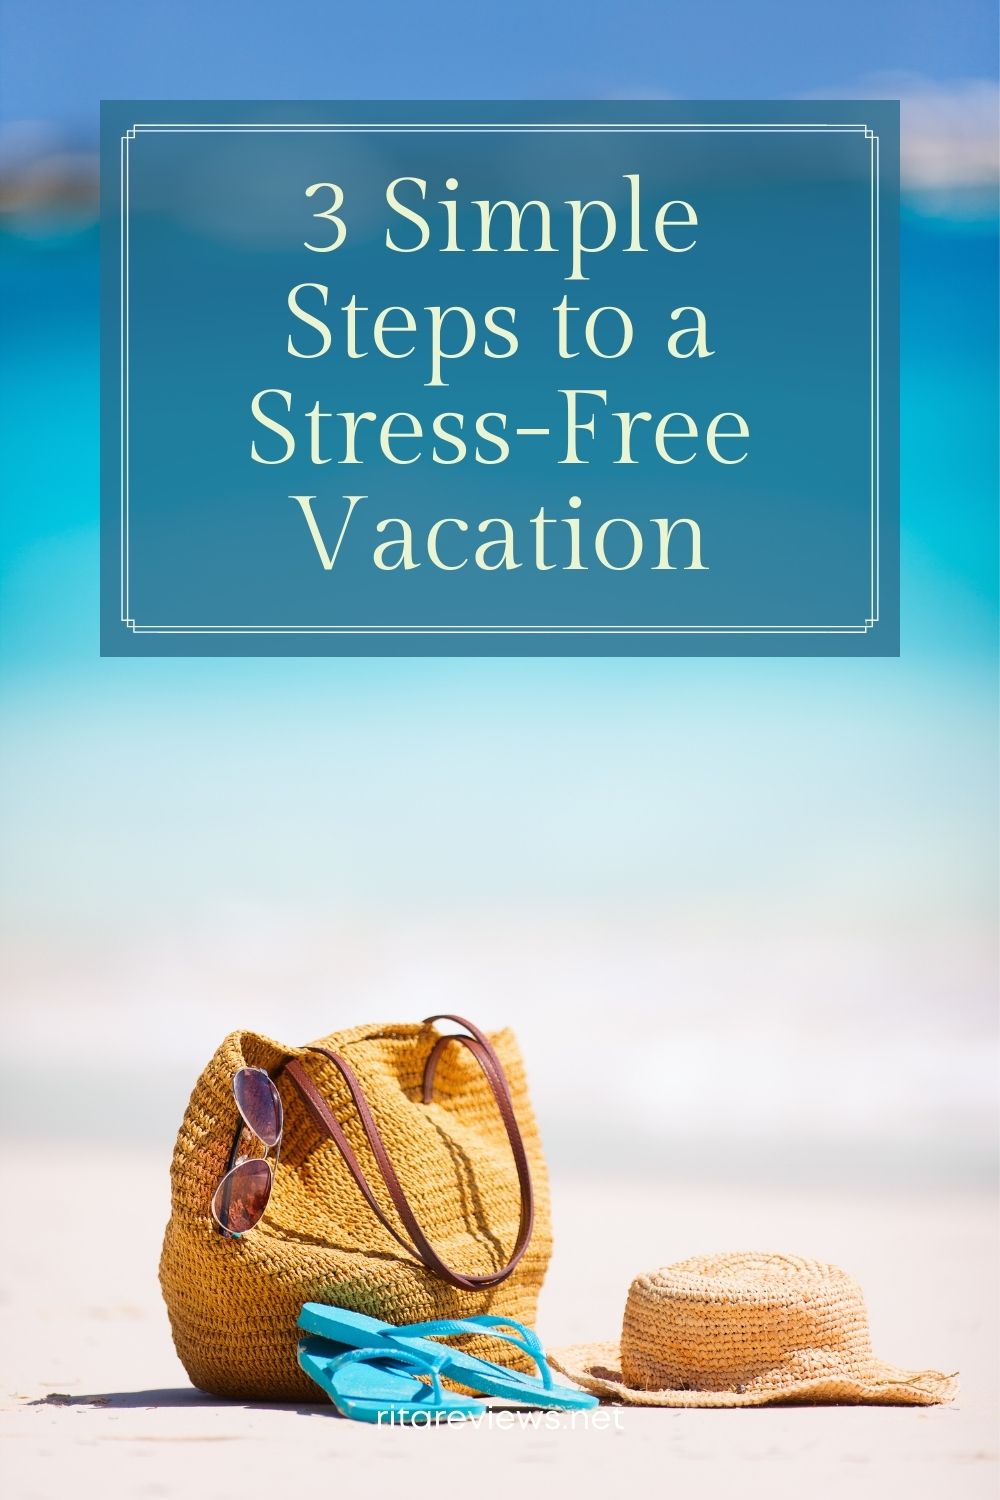 3 Simple Steps to a Stress-Free Vacation